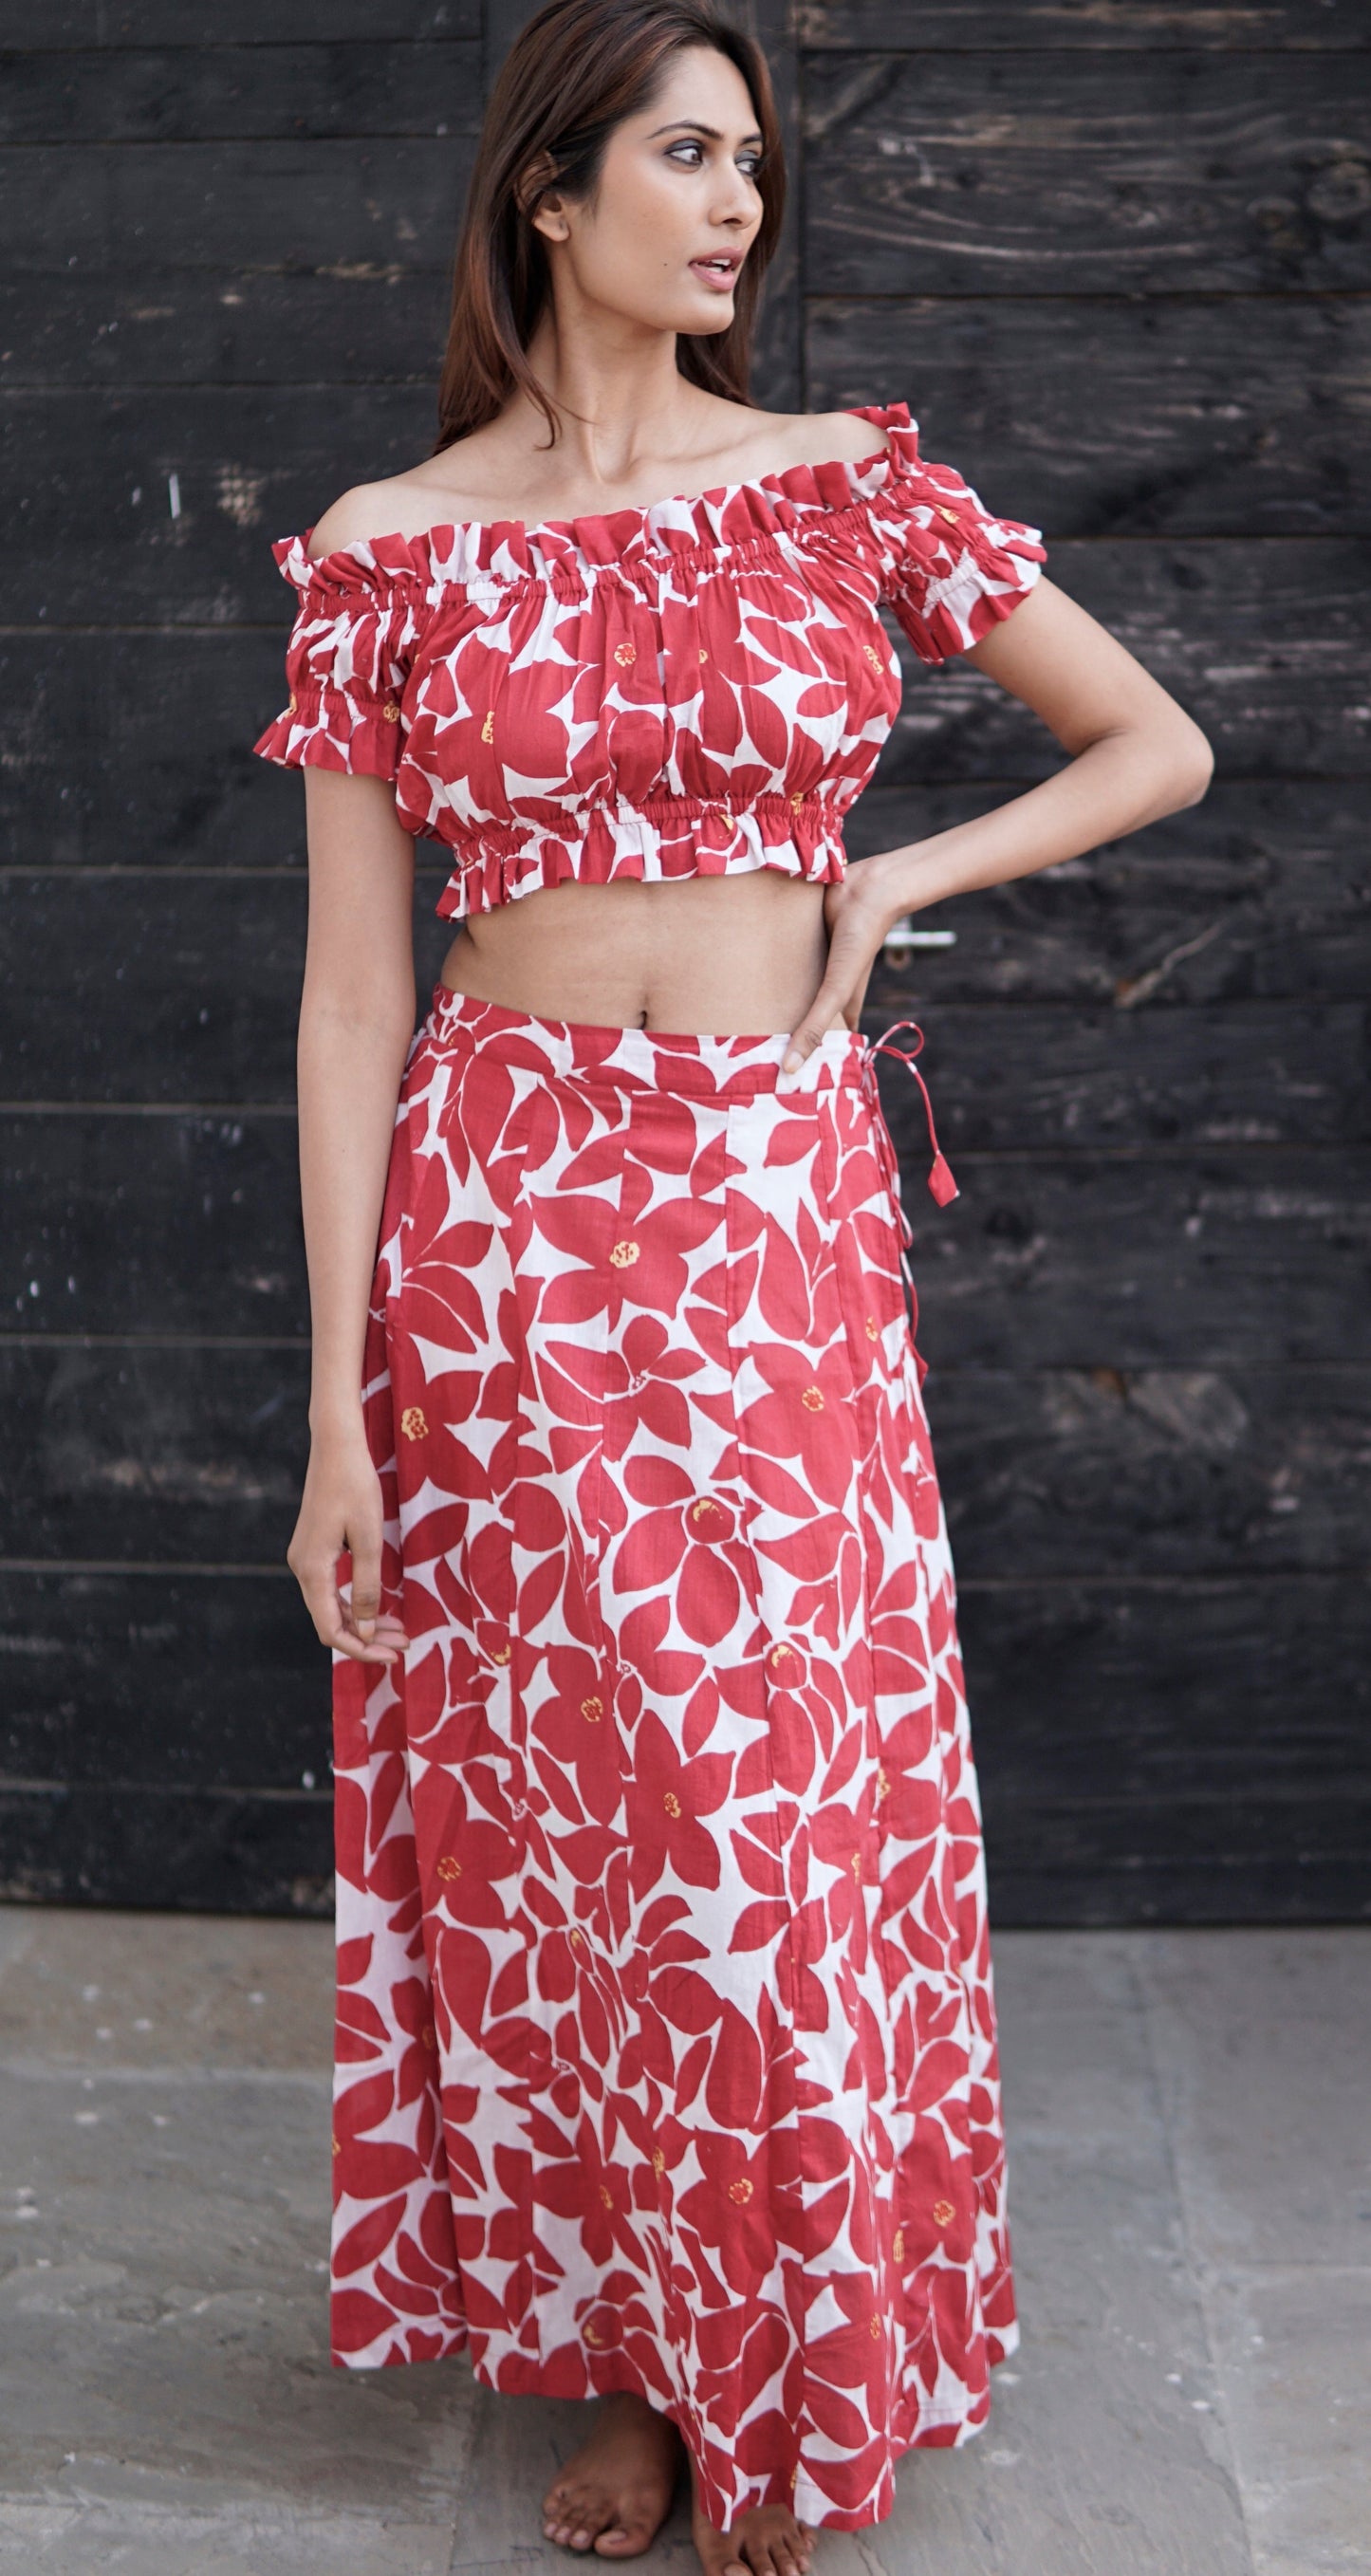 coord set. red and cream skirt and ruched top co-ord set for women. maxi skirt and matching top. summer maxi skirt in red and cream. Boho co-ord set. cotton co-ord set for summer. 